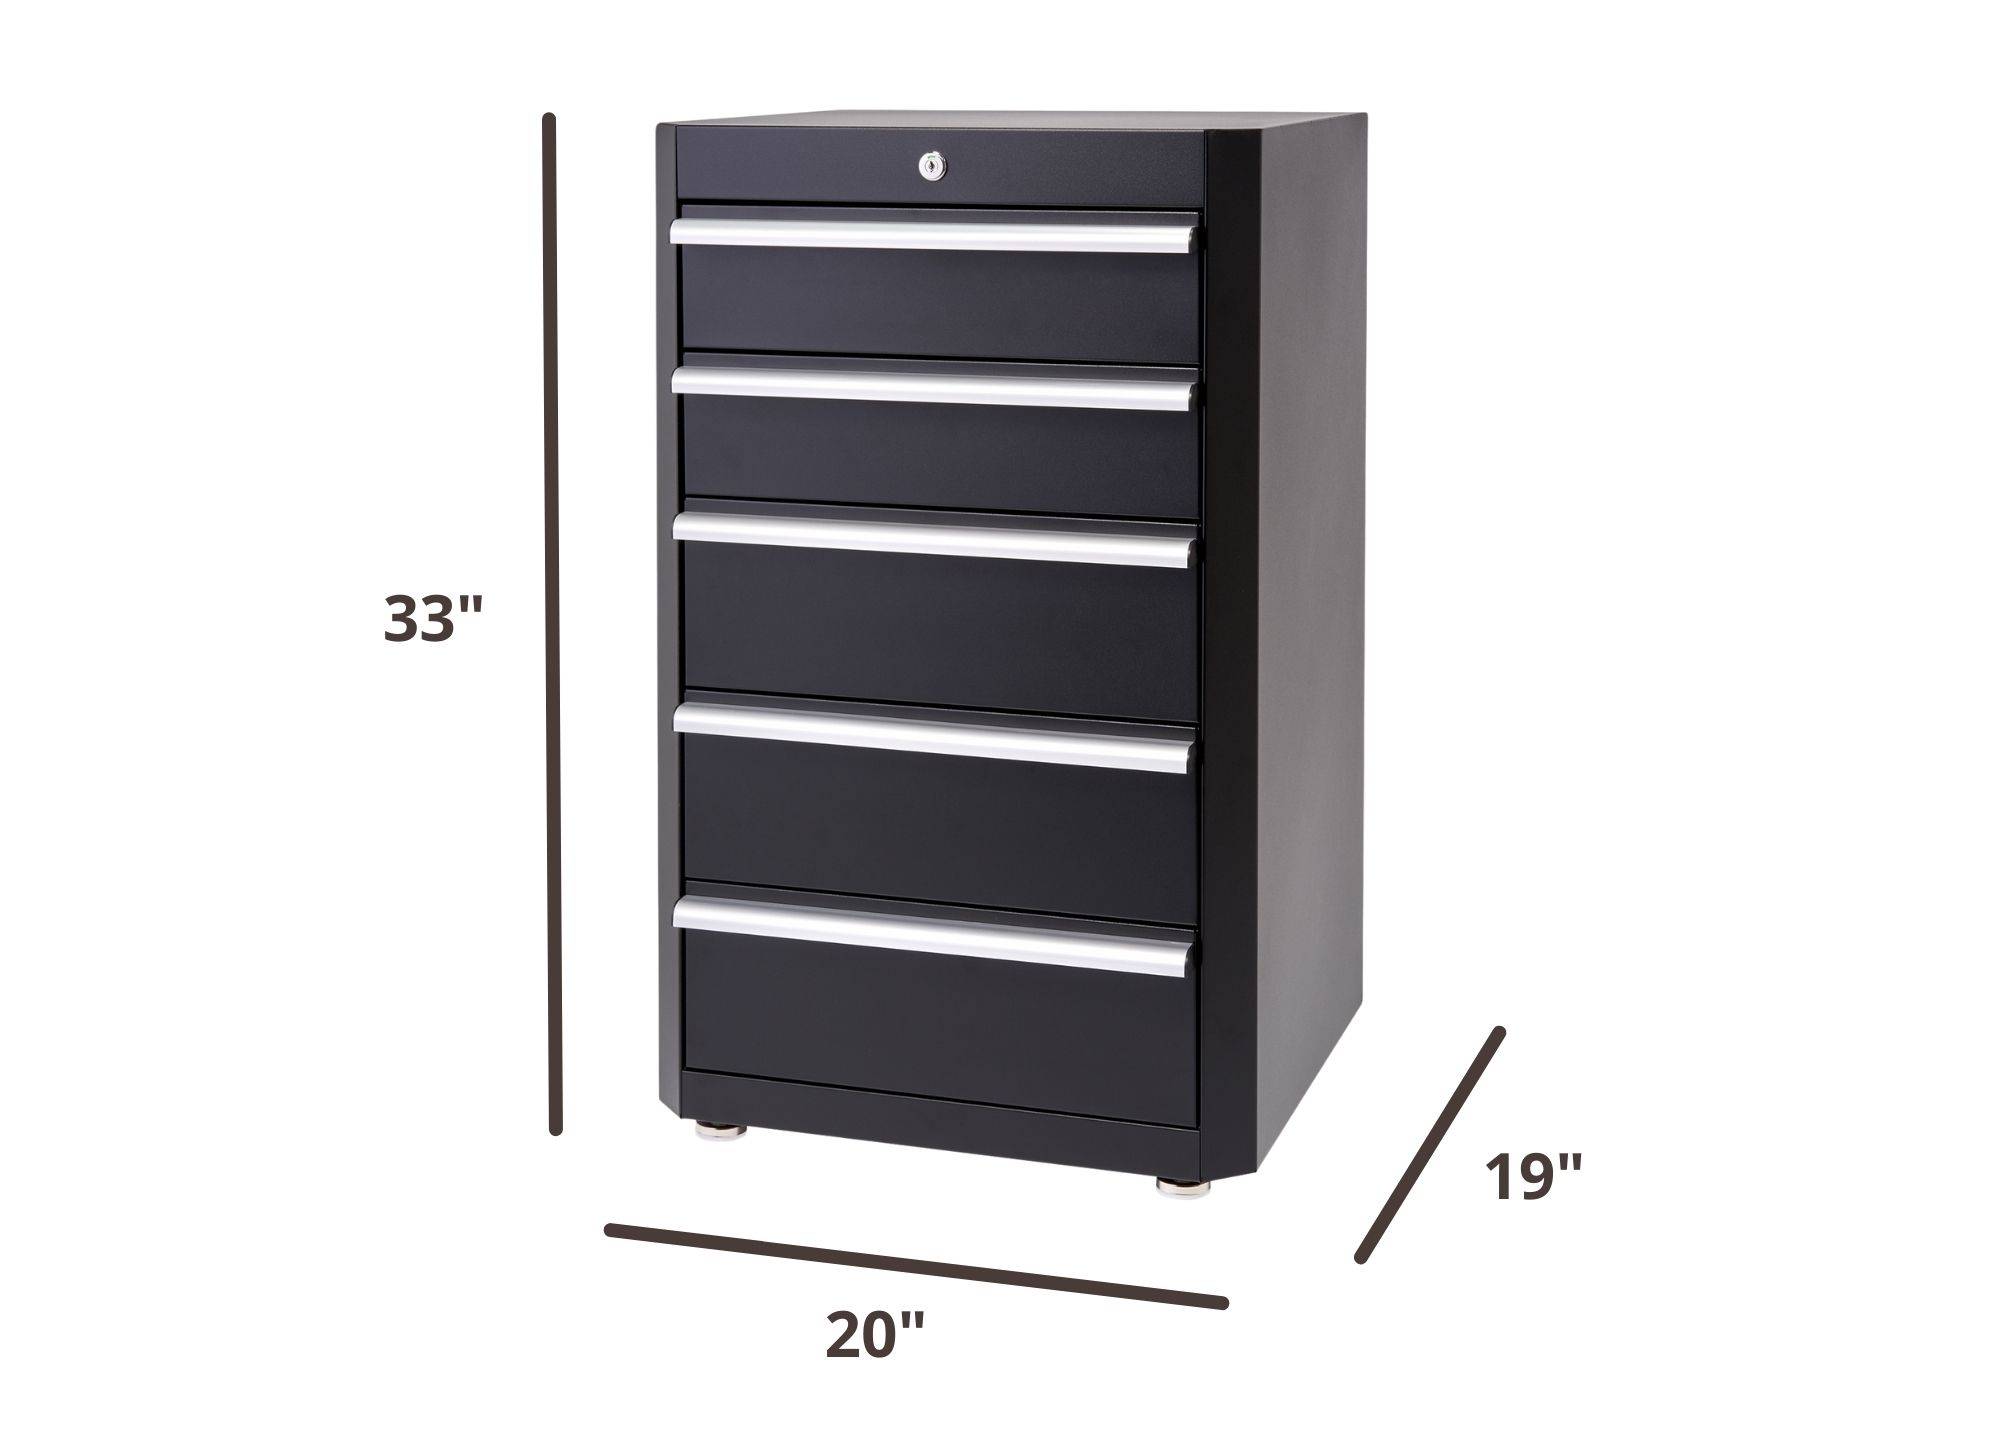 33 inches tall base cabinet drawer